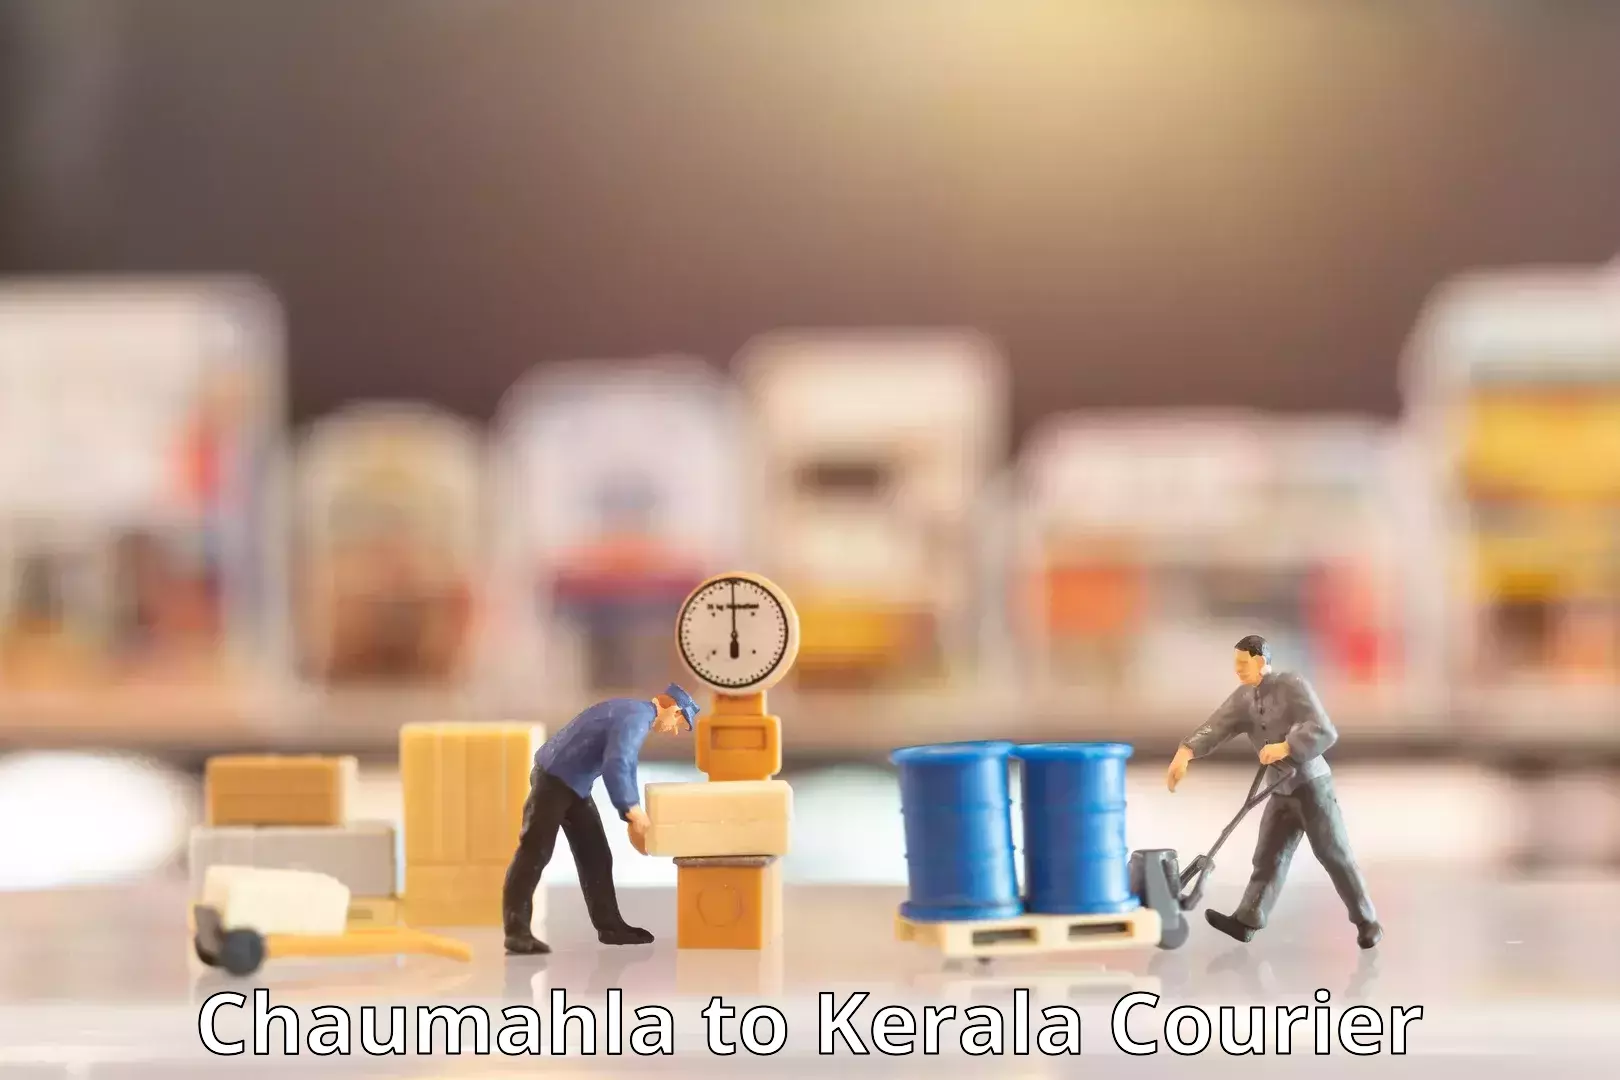 Multi-national courier services Chaumahla to Malappuram